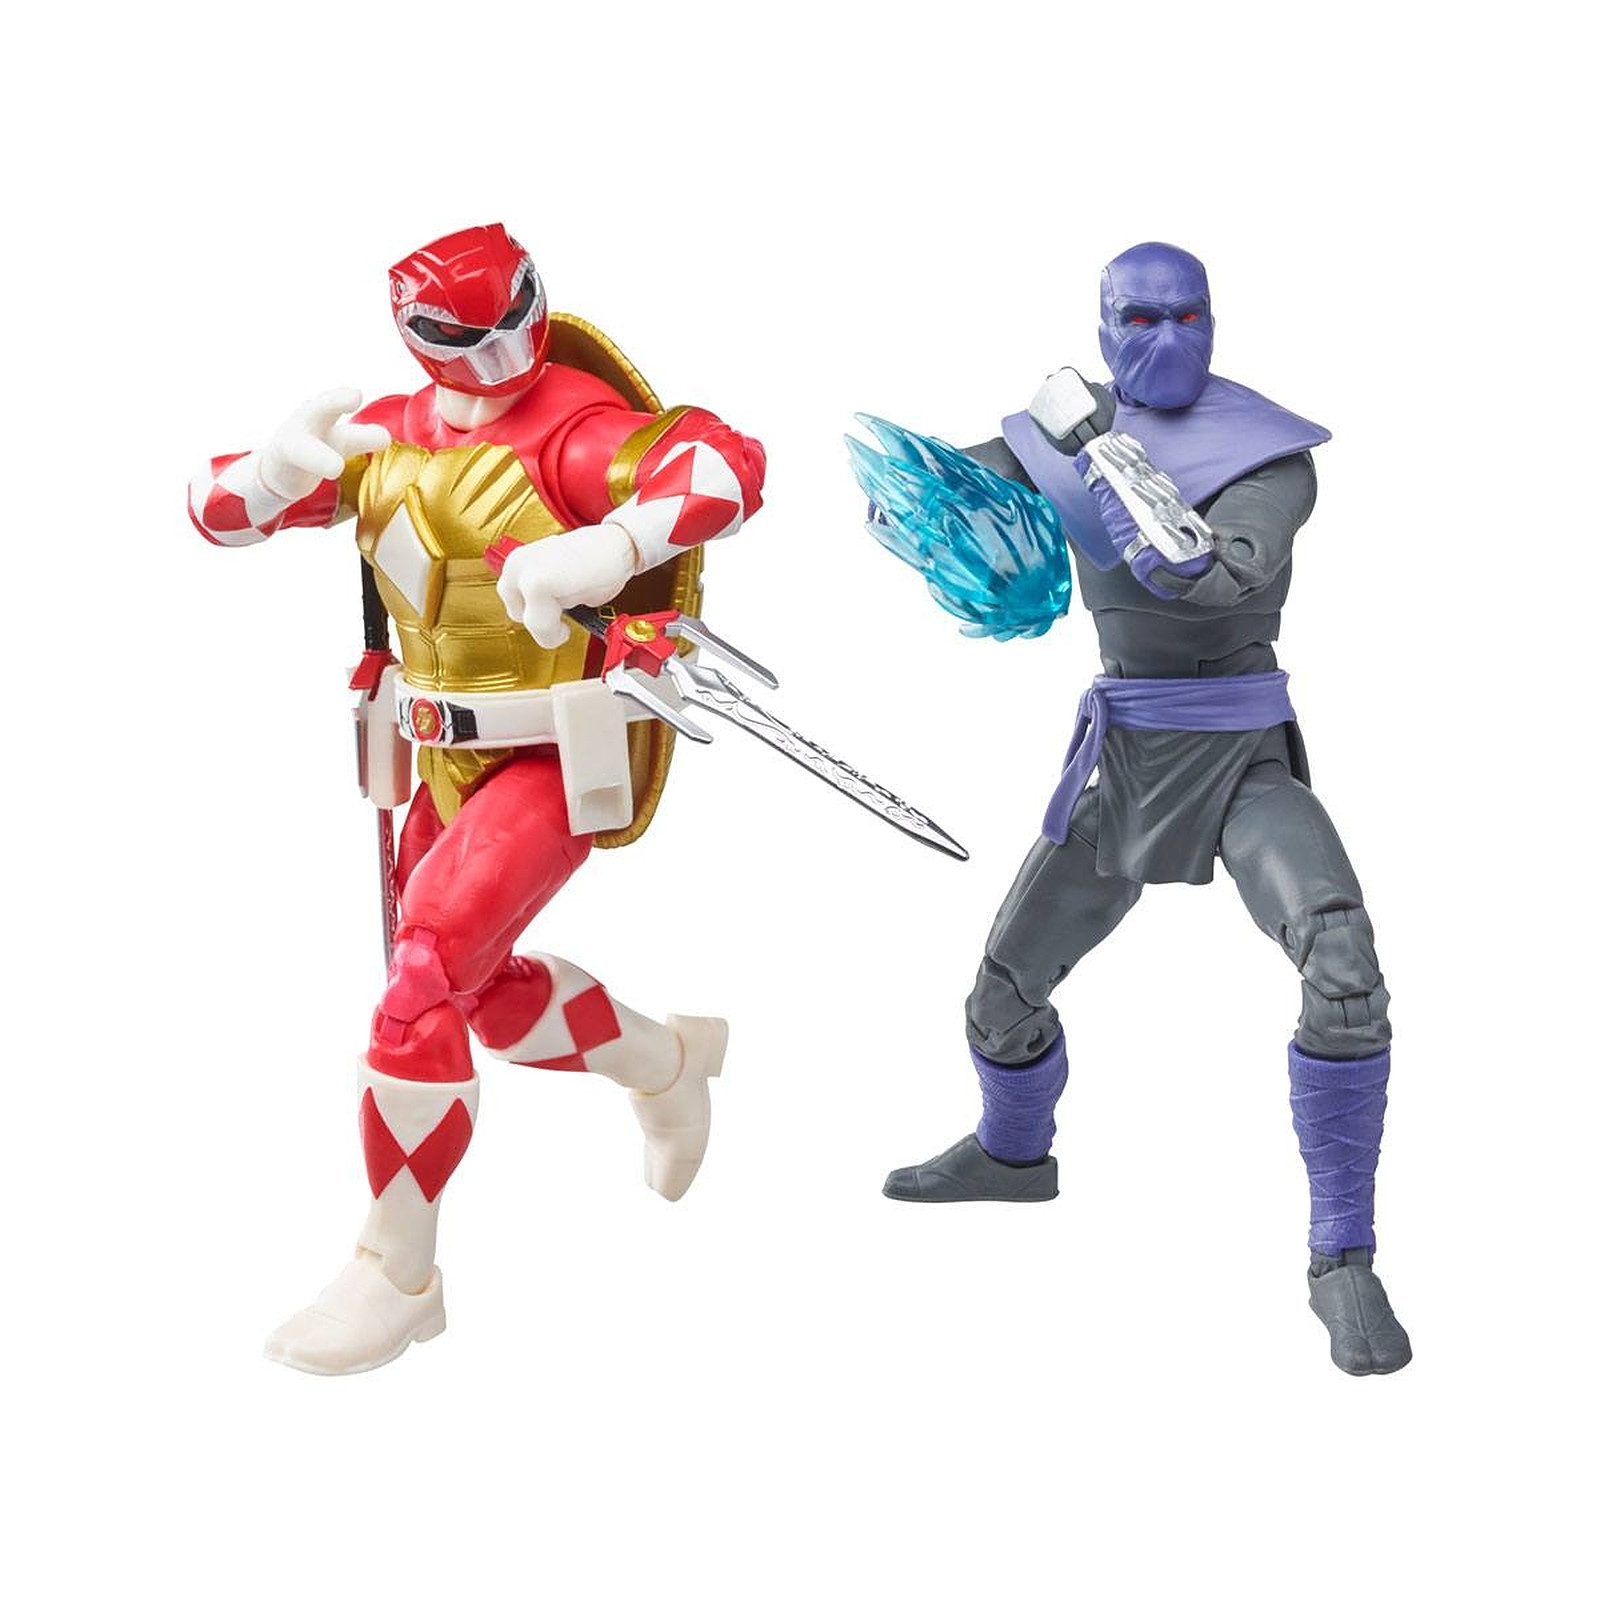 Power Rangers X TMNT Lightning Collection 2022 - Figurines Foot Soldier Tommy & Morphed Raphae - Figurines Hasbro